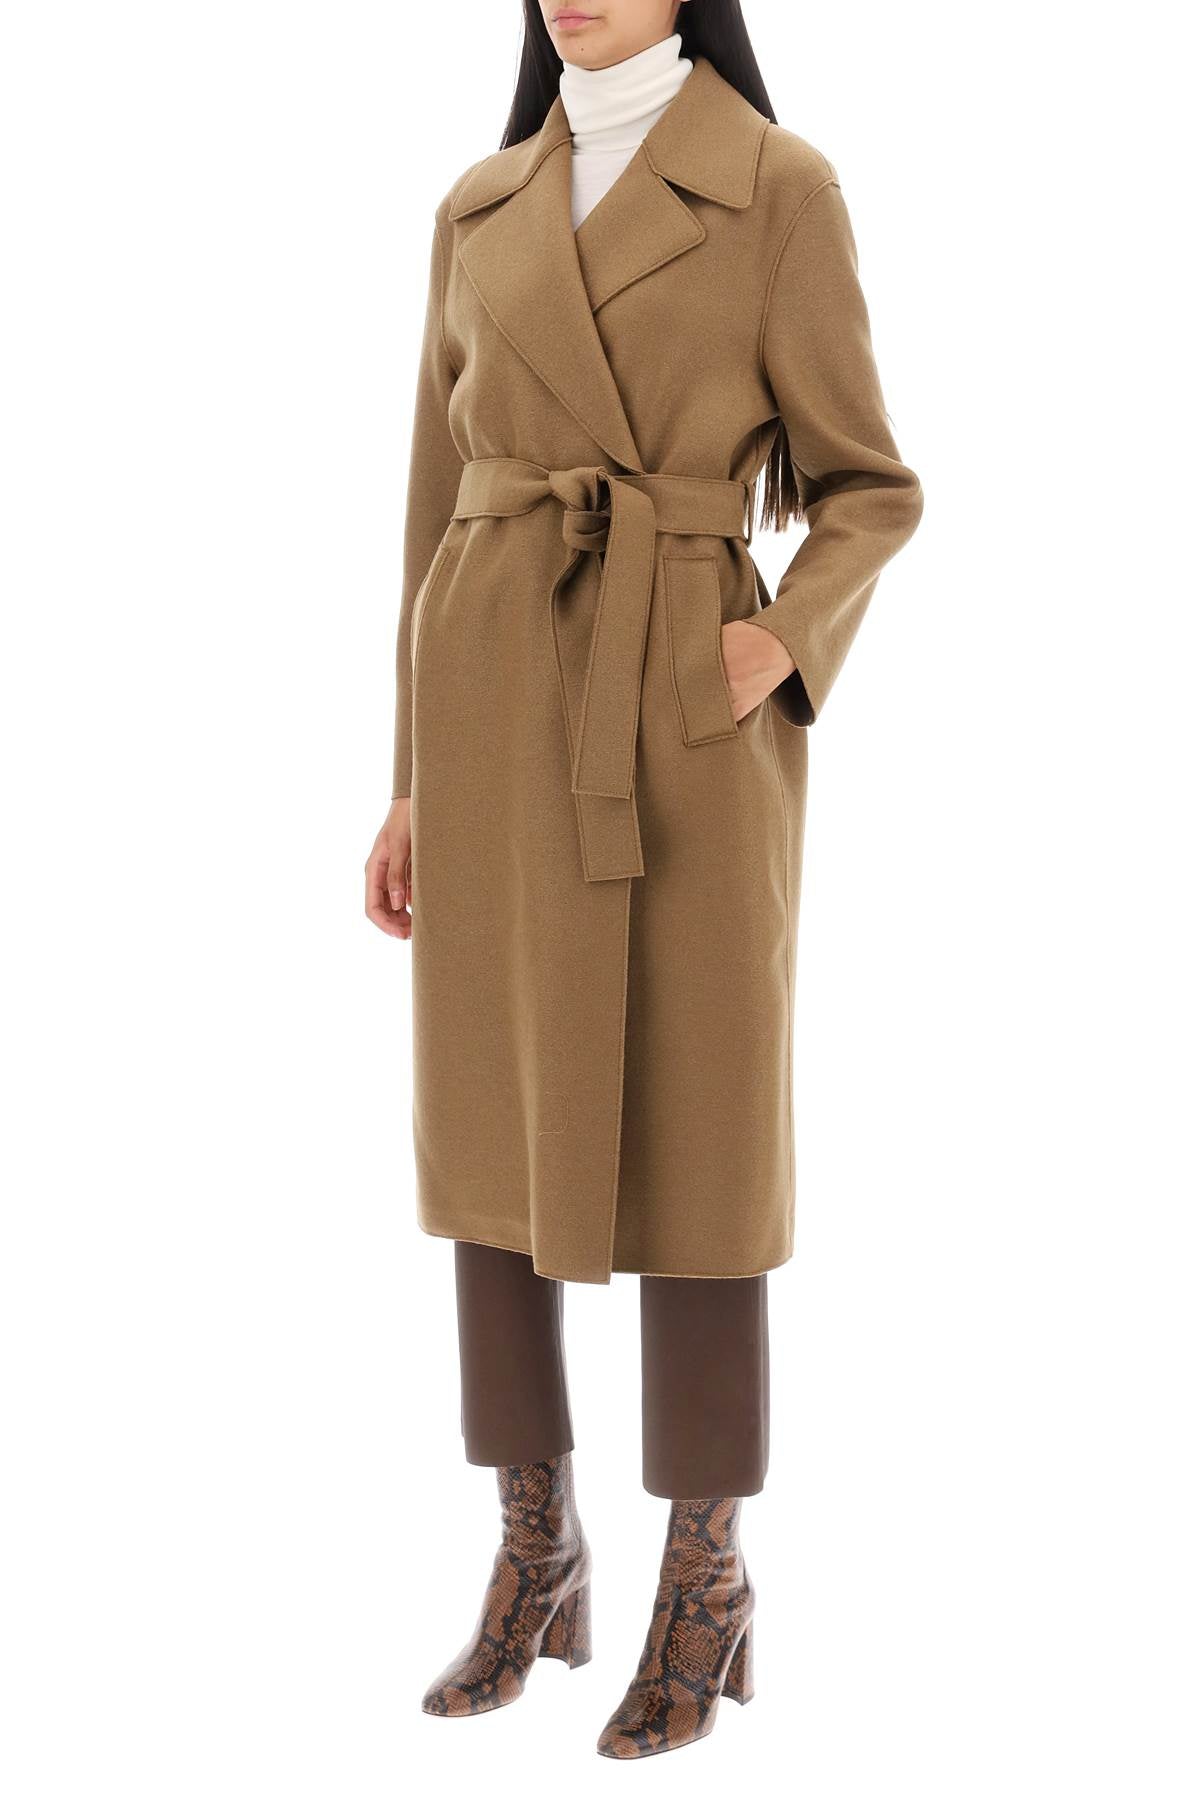 Harris wharf london long robe coat in pressed wool and polaire-3